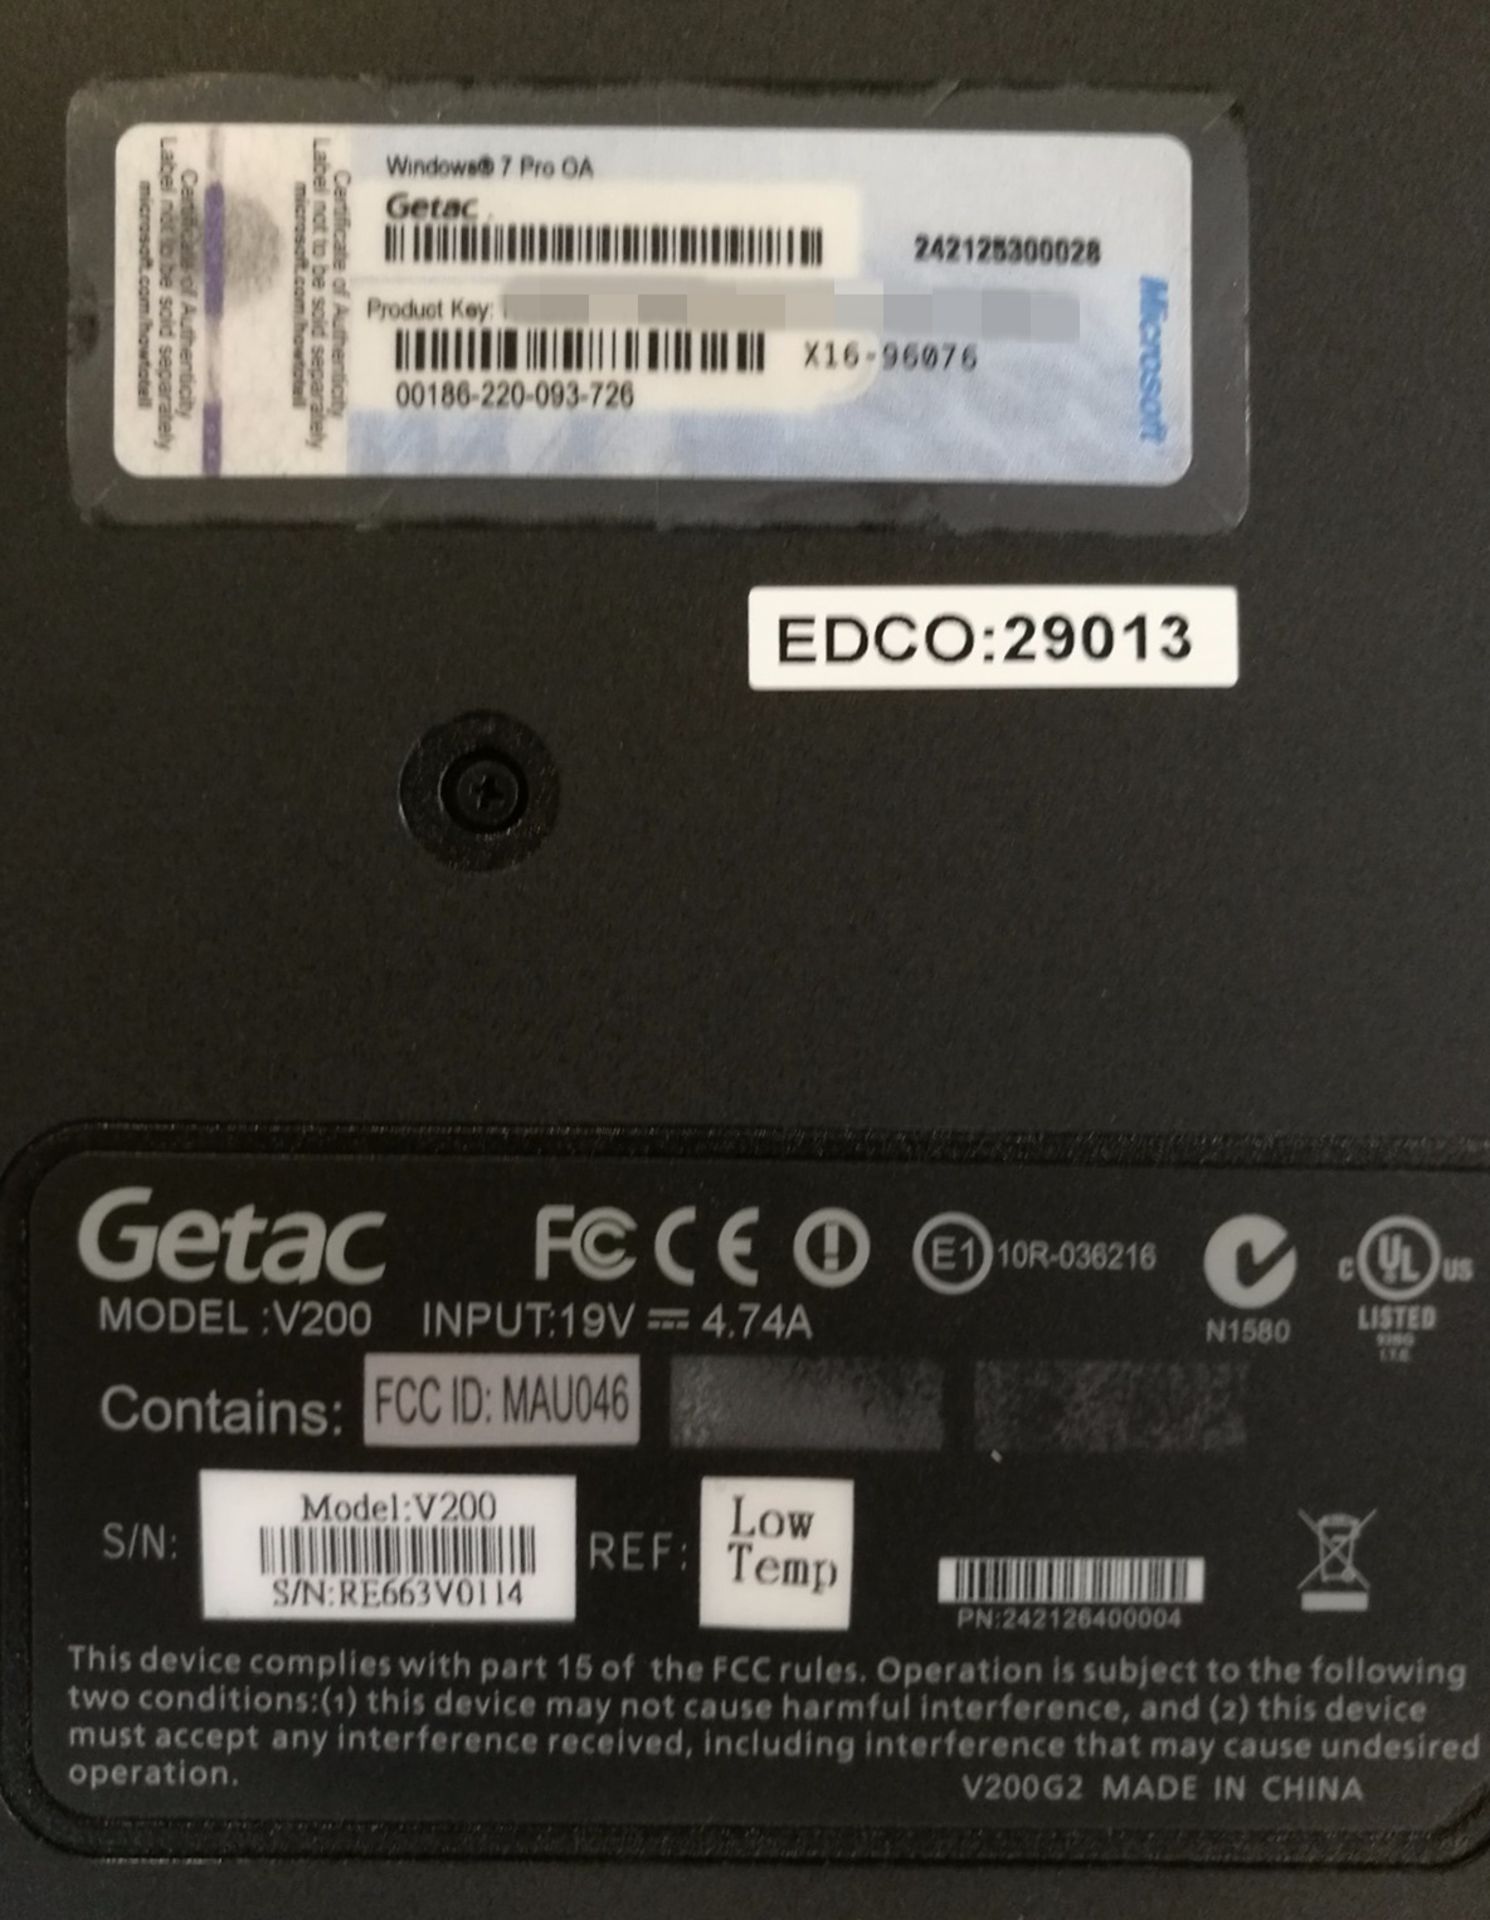 1 x Getac V200 Rugged Laptop Computer - Rugged Laptop That Transforms into a Tablet PC - Features an - Image 6 of 15